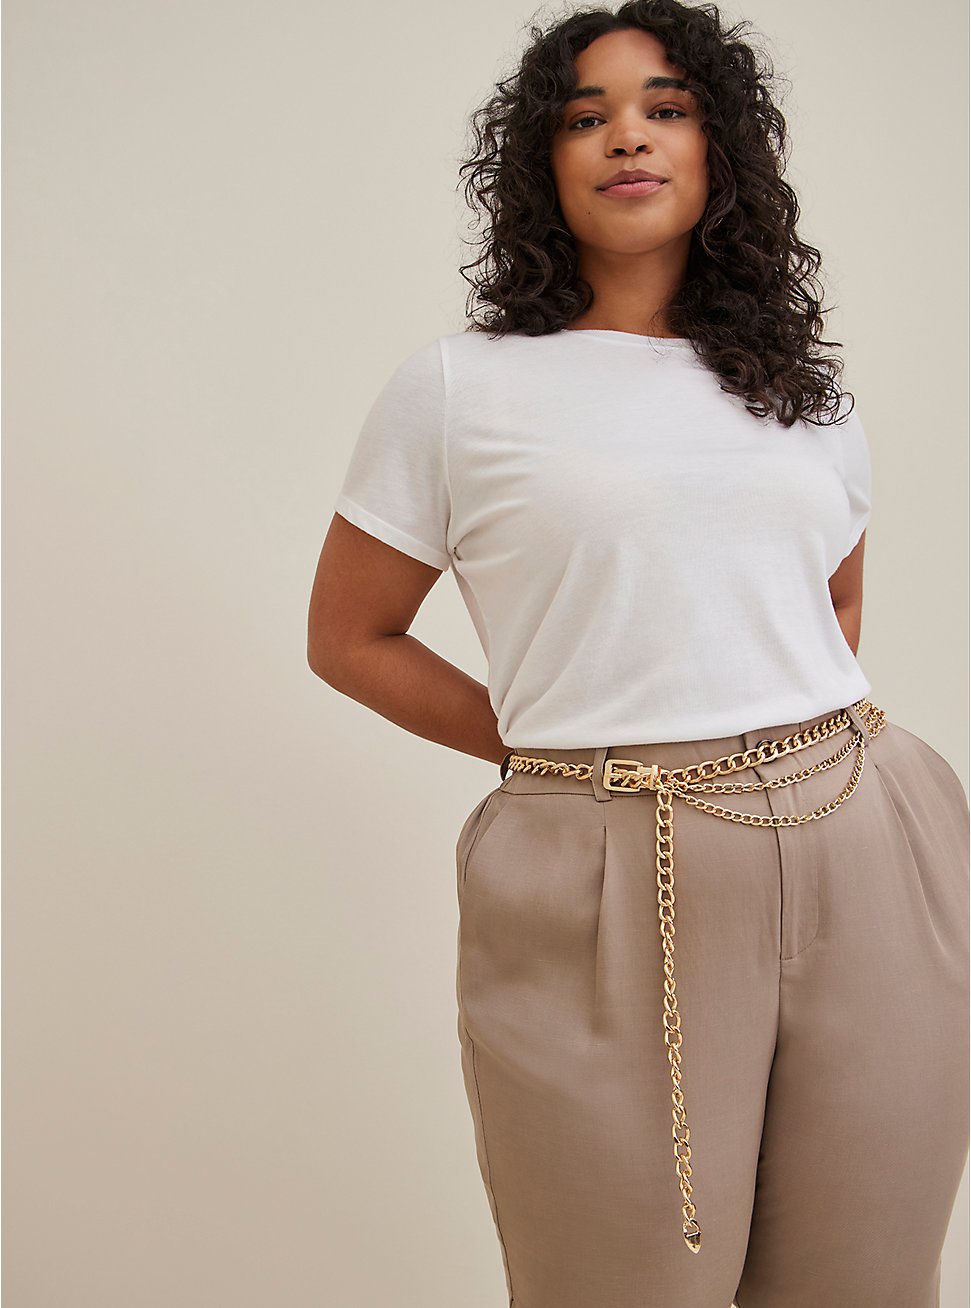 Plus Size Link Layered Chain Belt - Gold Tone, GOLD, hi-res